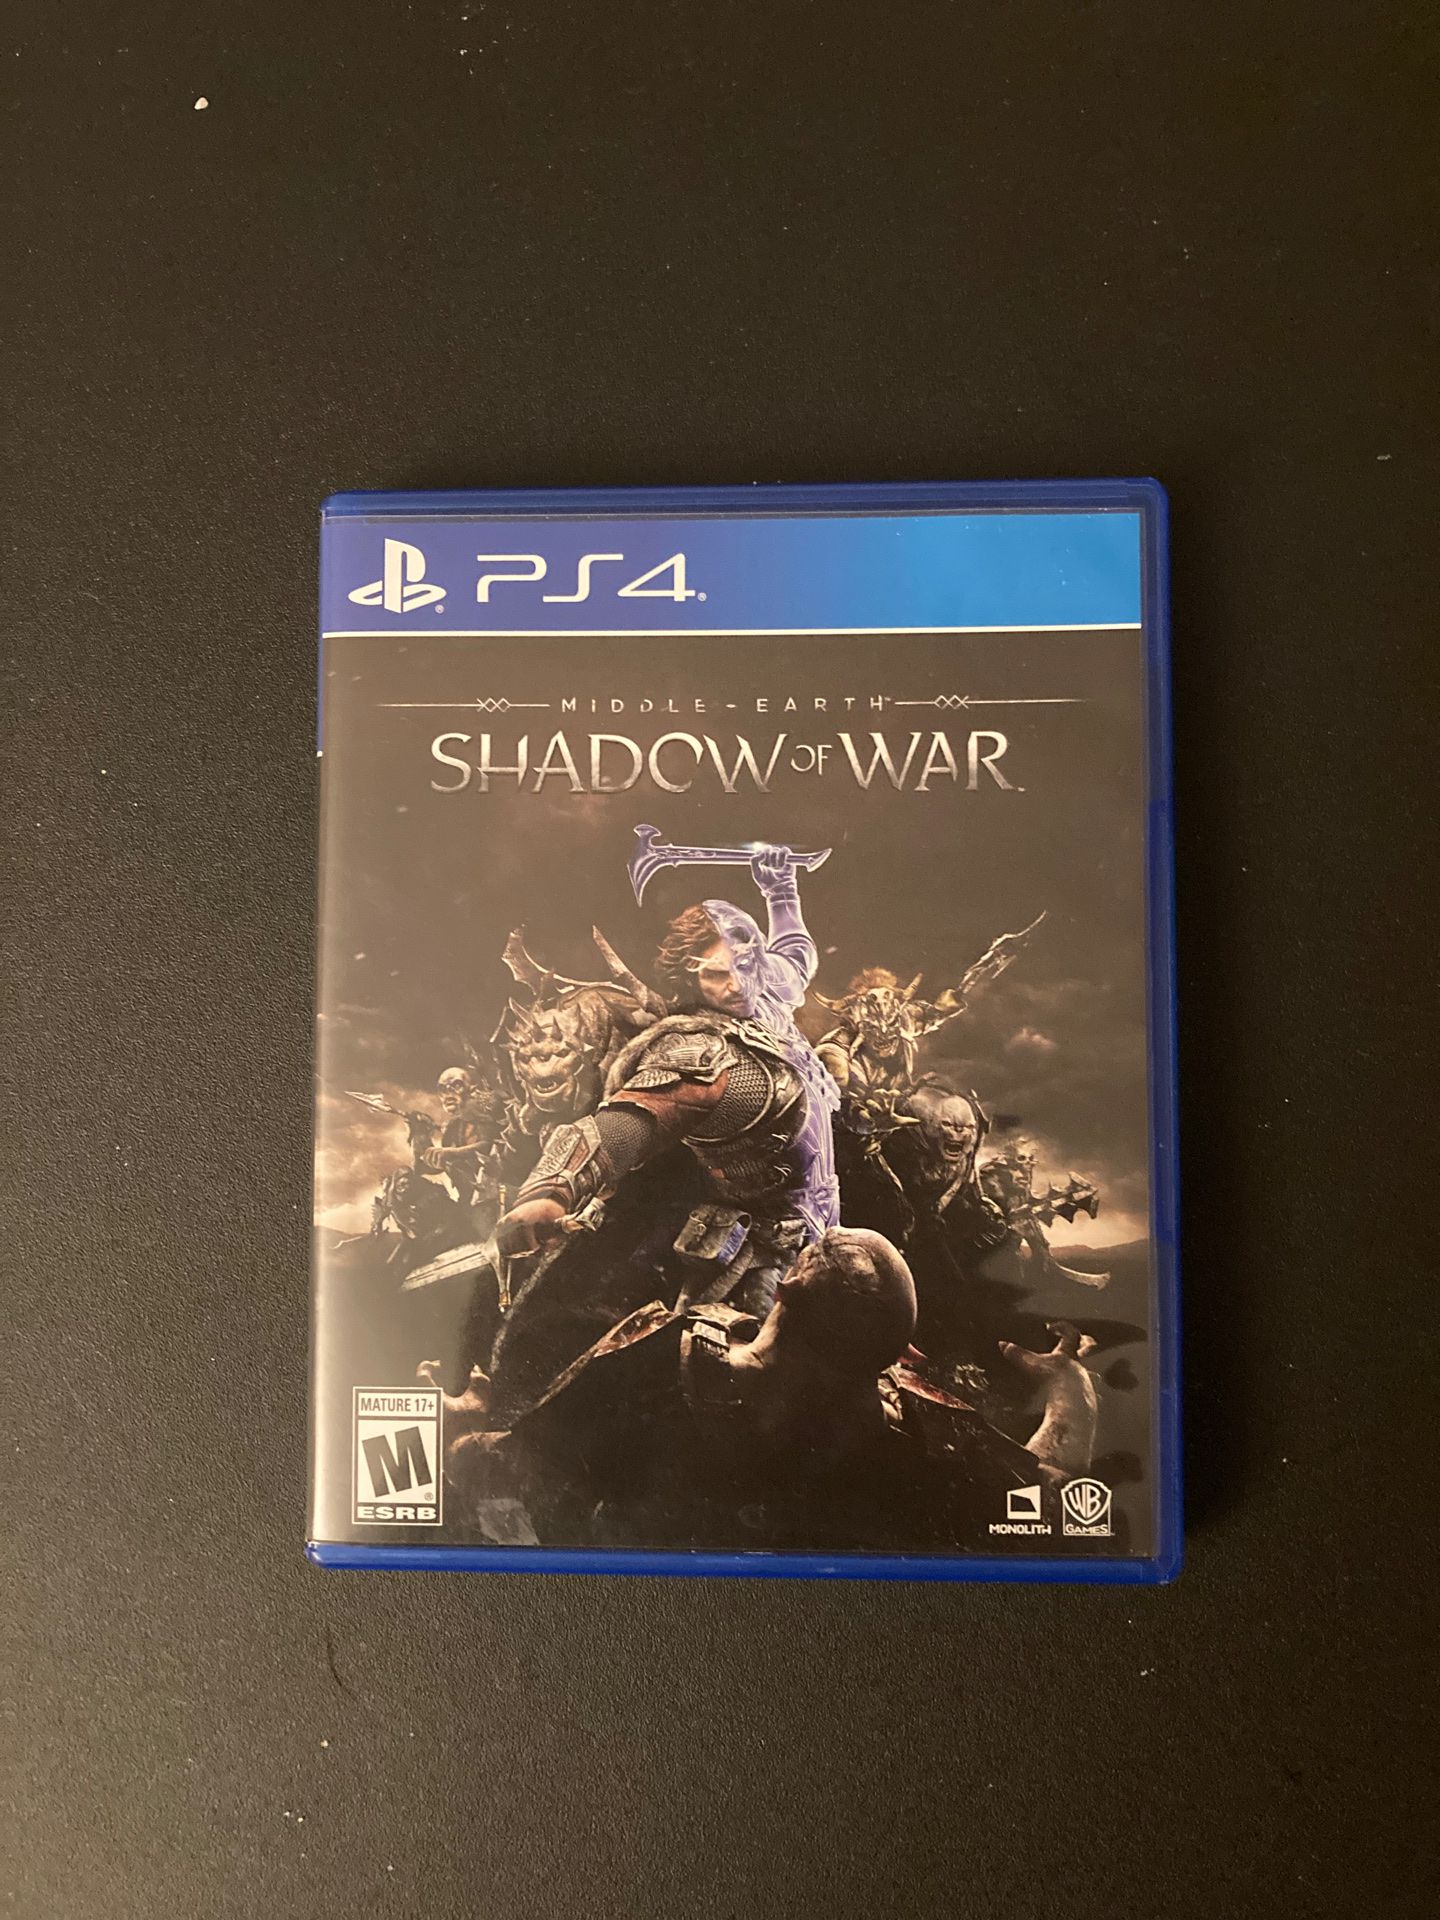 Middle-Earth Shadow of War for Ps4